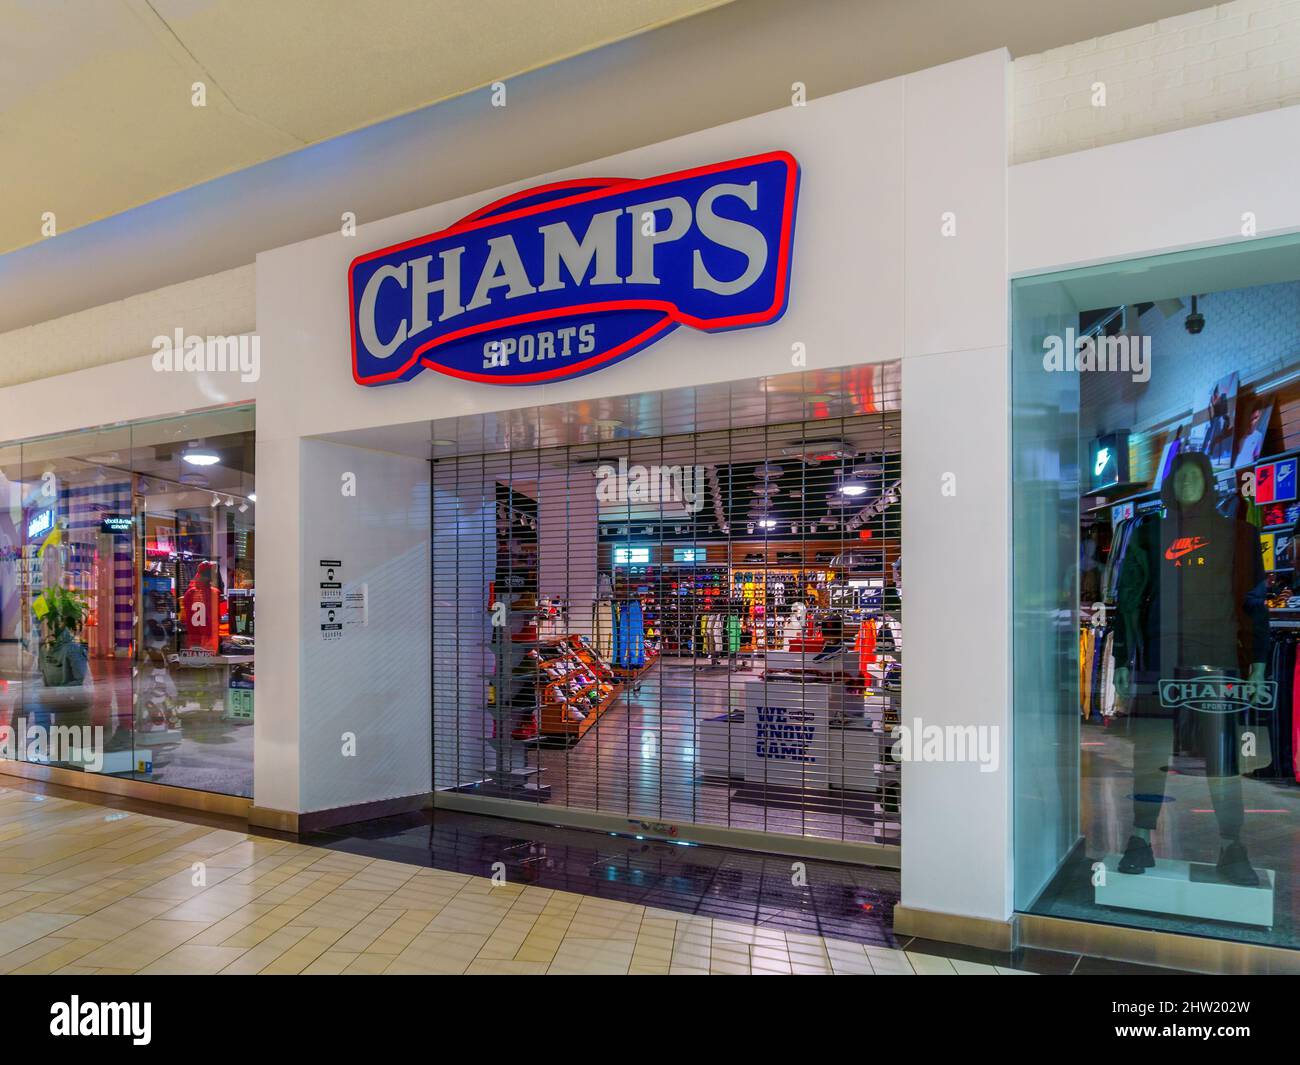 New Hartford, New York - Mar 1, 2022: Closeup View of CHAMPS SPORTS Storefront in Sangertown Mall. Stock Photo